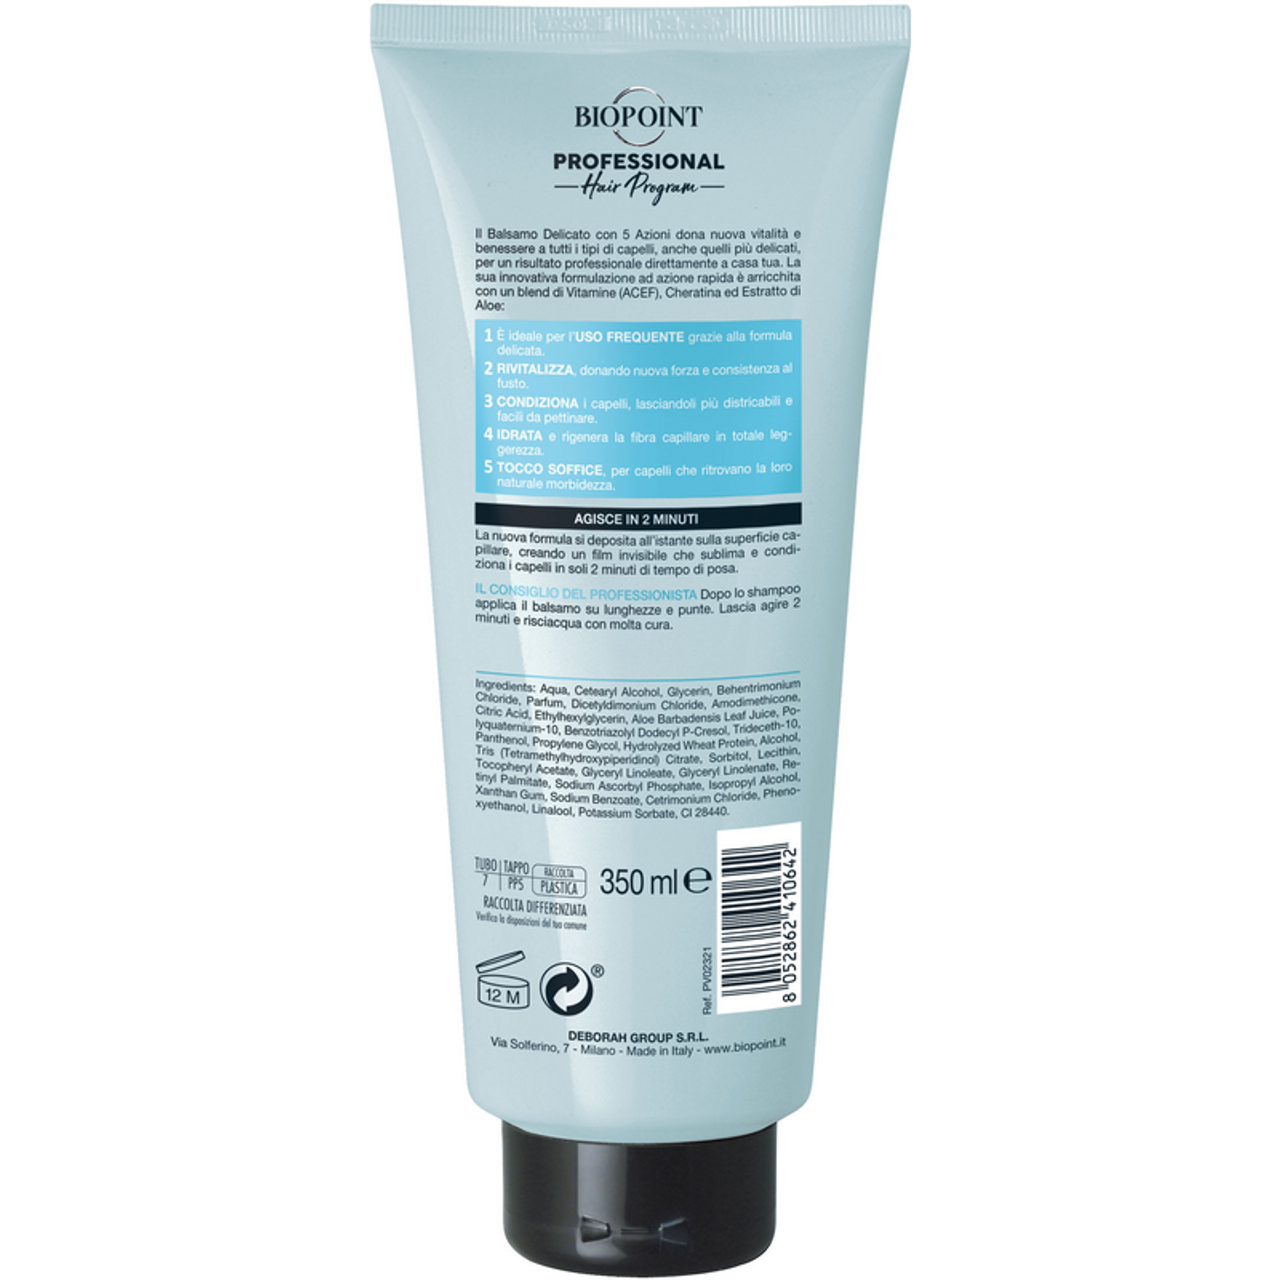 Biopoint Professional Delicate Balm ultra softness 5 actions all types of hair hair 350 ml